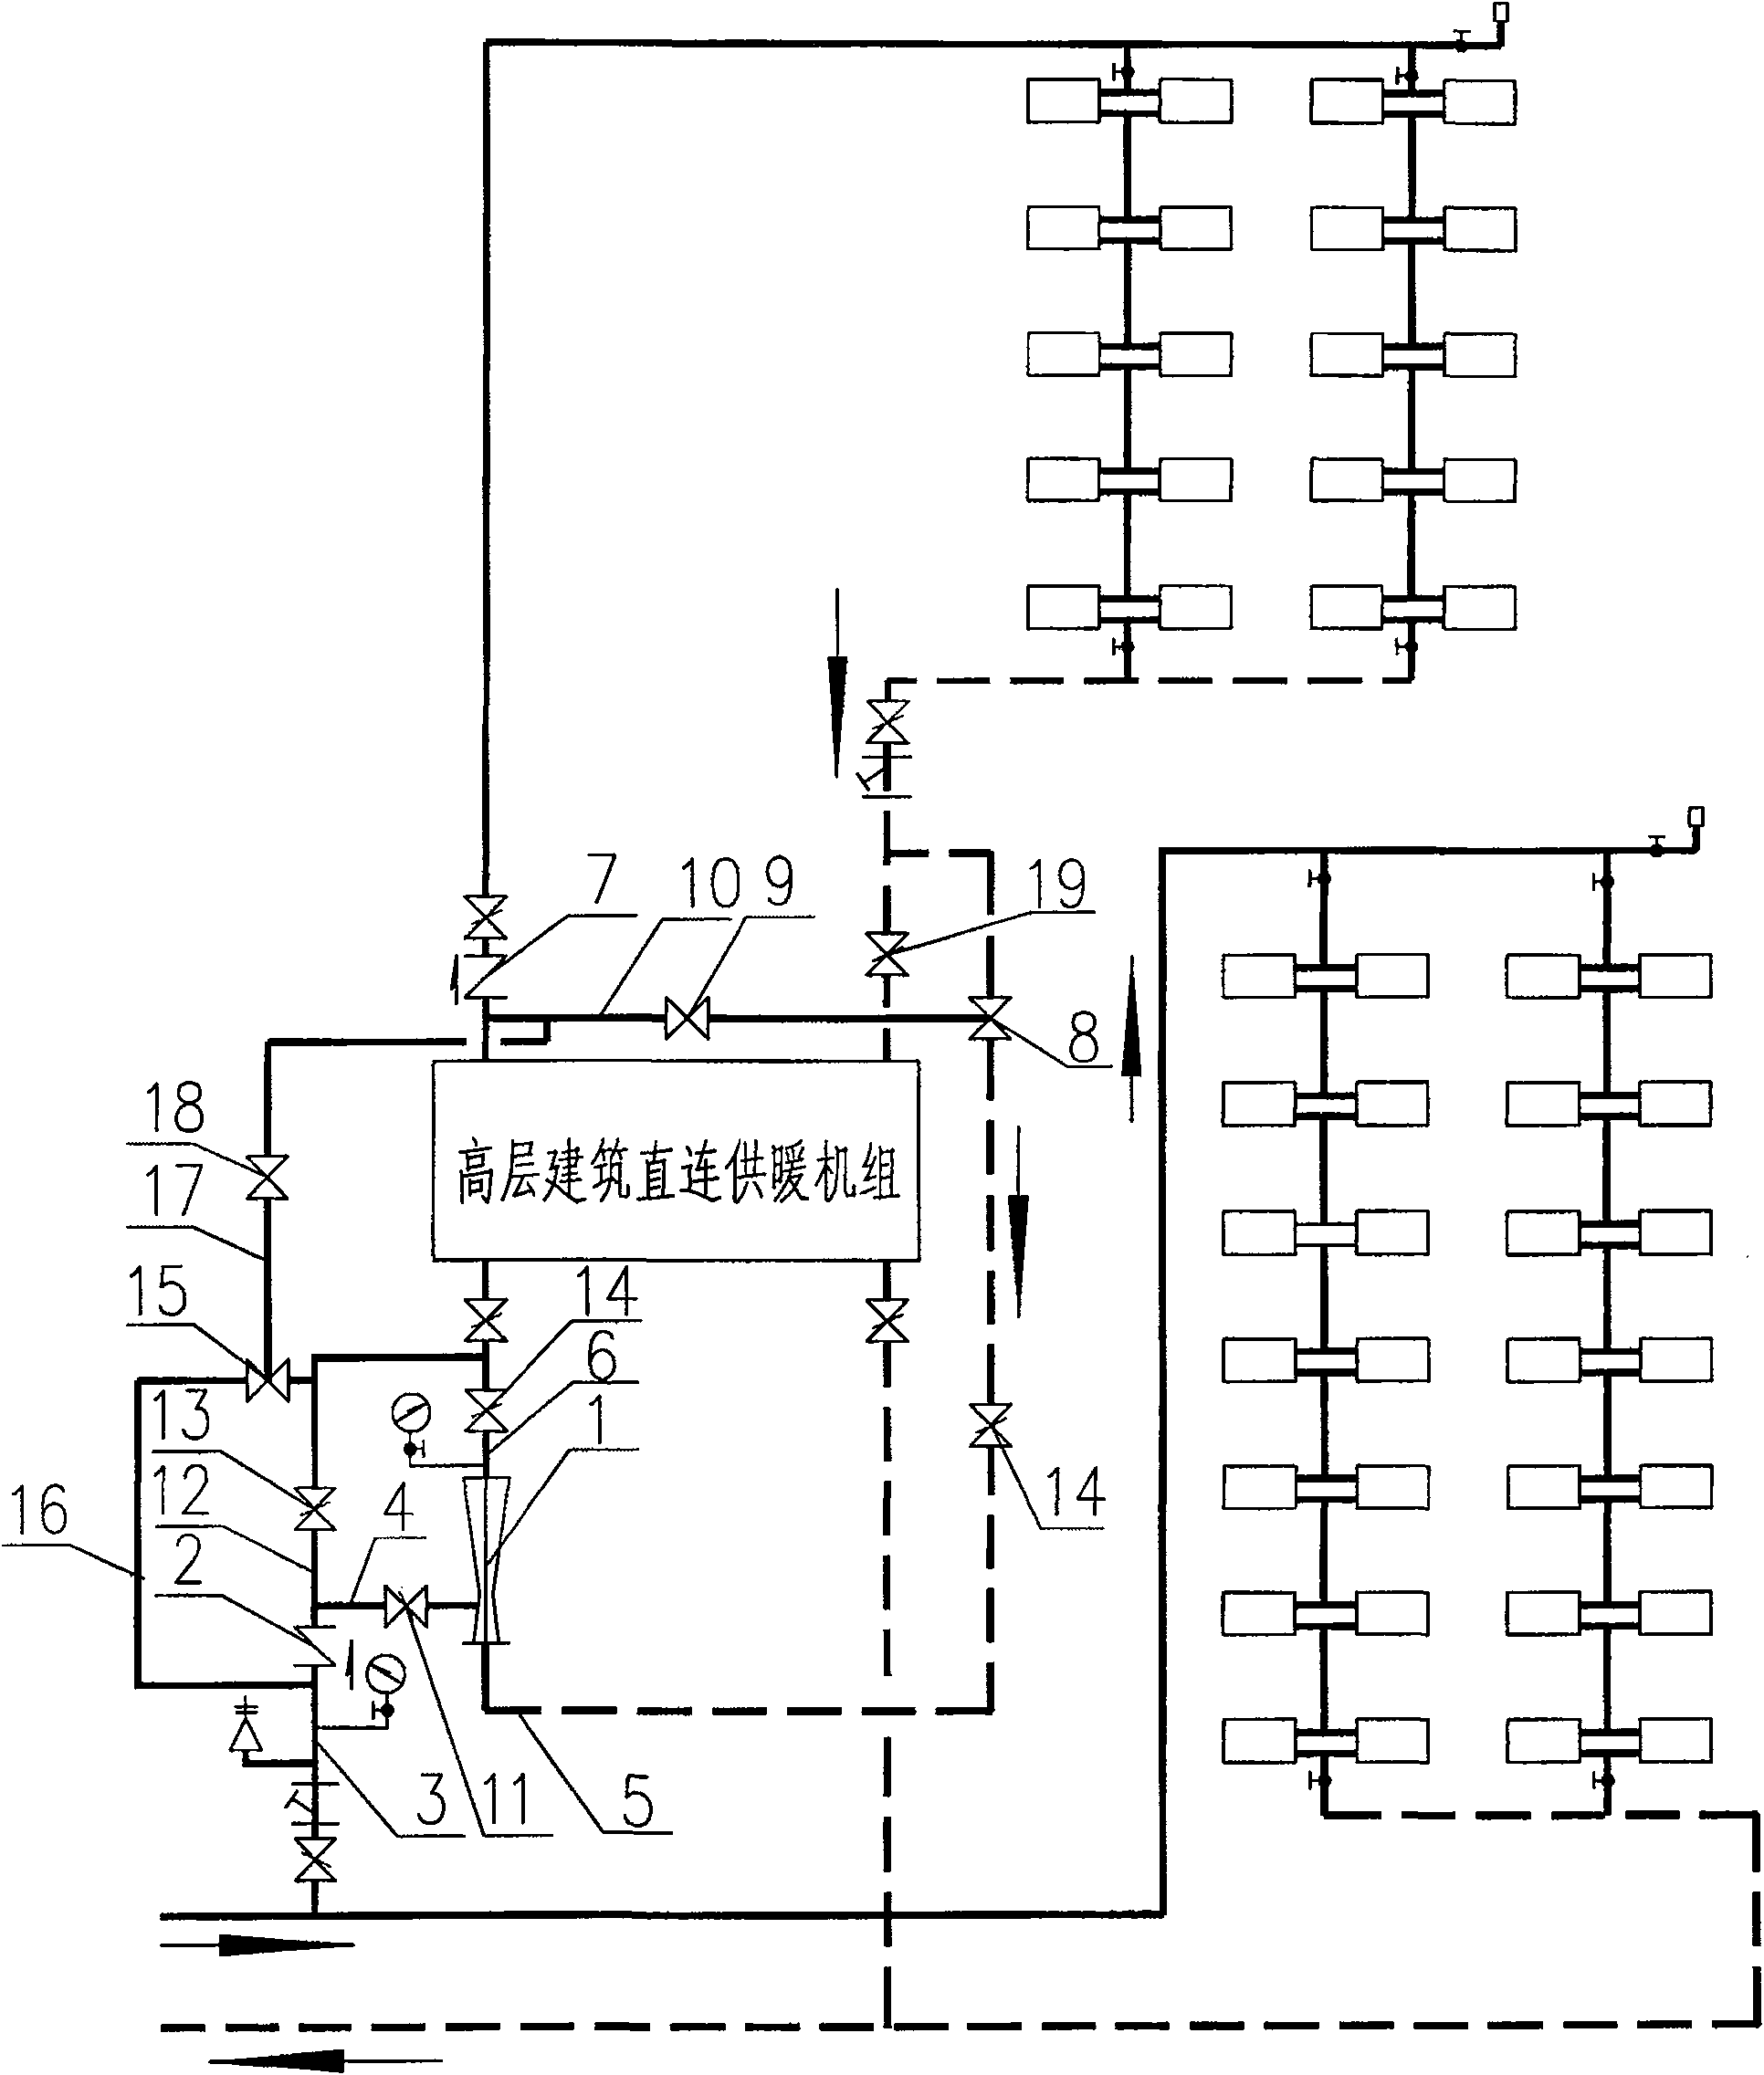 Direct connection heating self-compressing unit for high-rise building